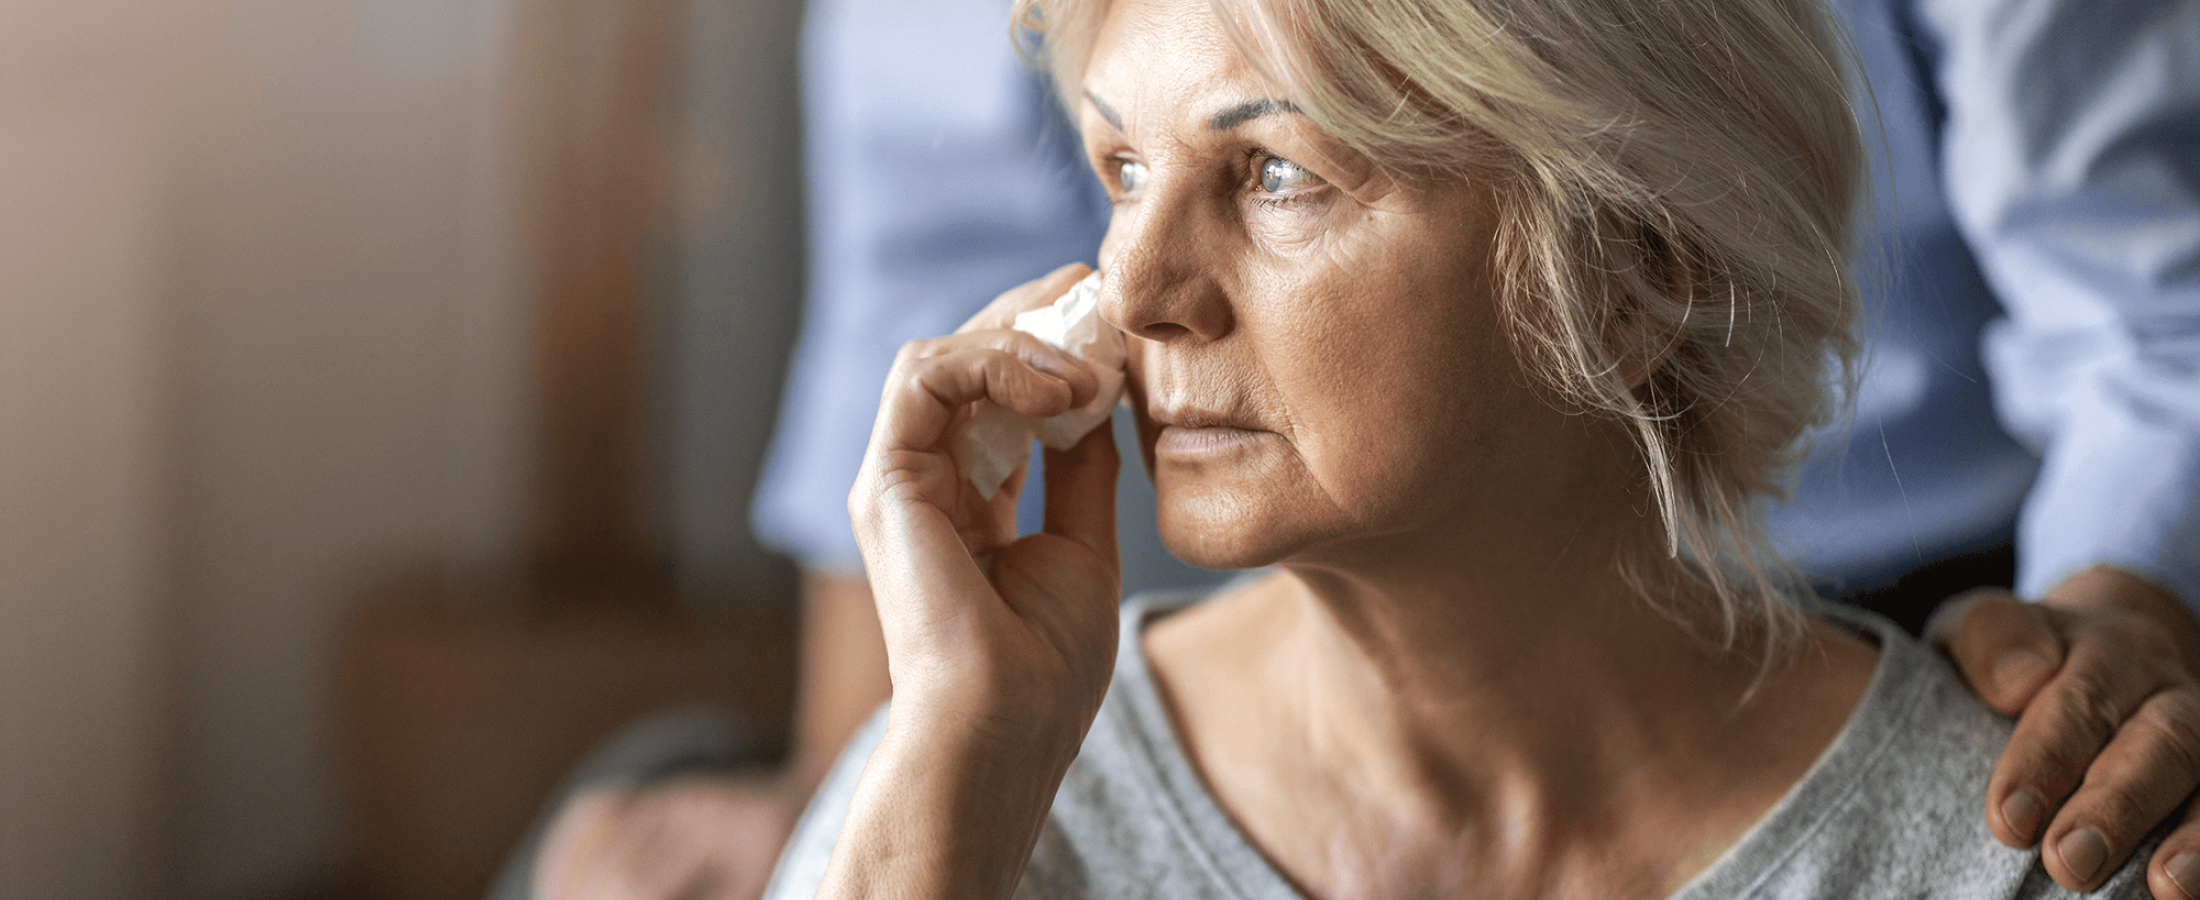 Elder abuse: Do you know the signs?